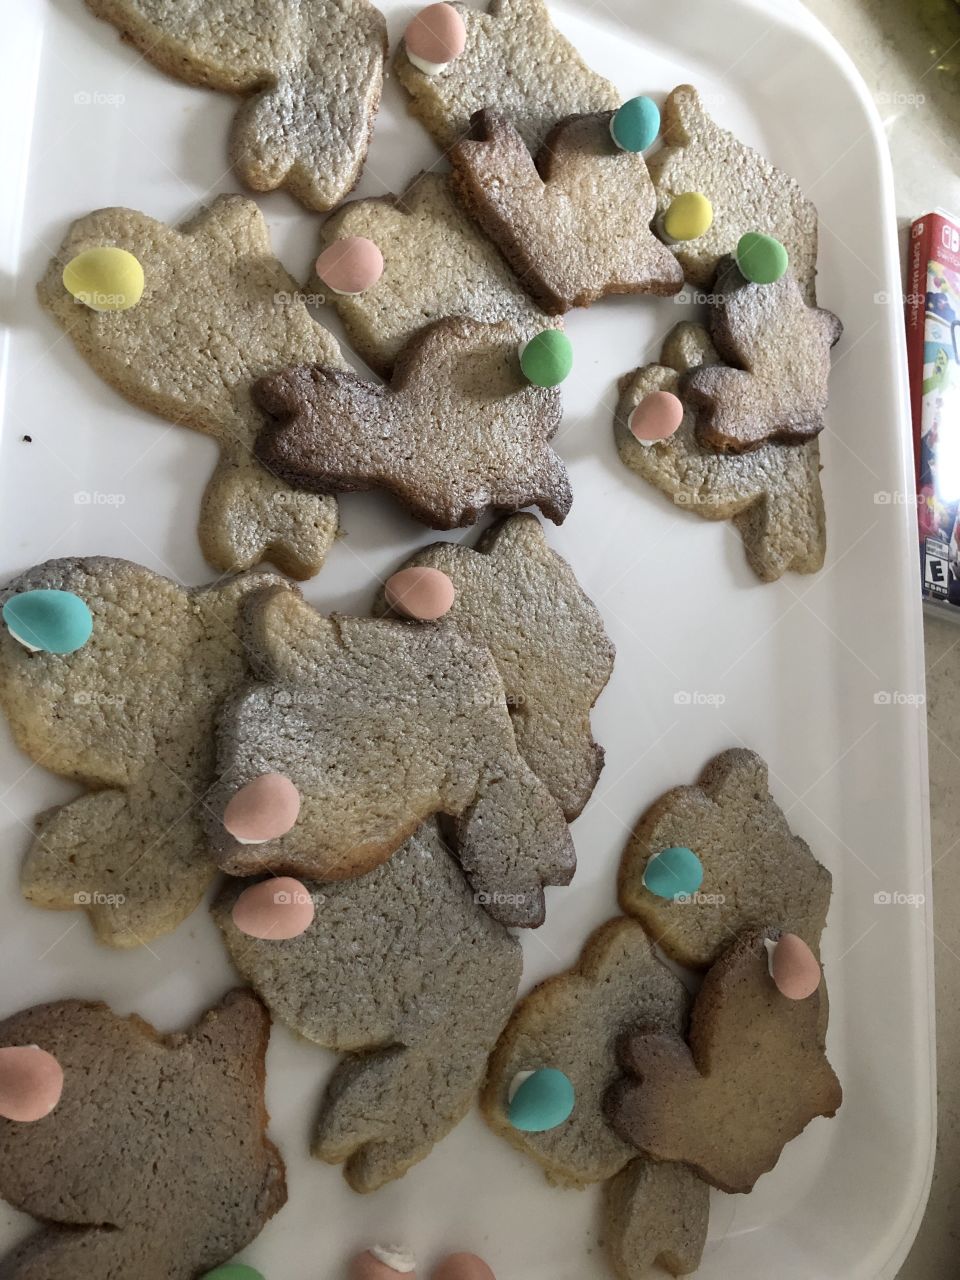 Bunny cookies. Here comes Peter cotton tail.